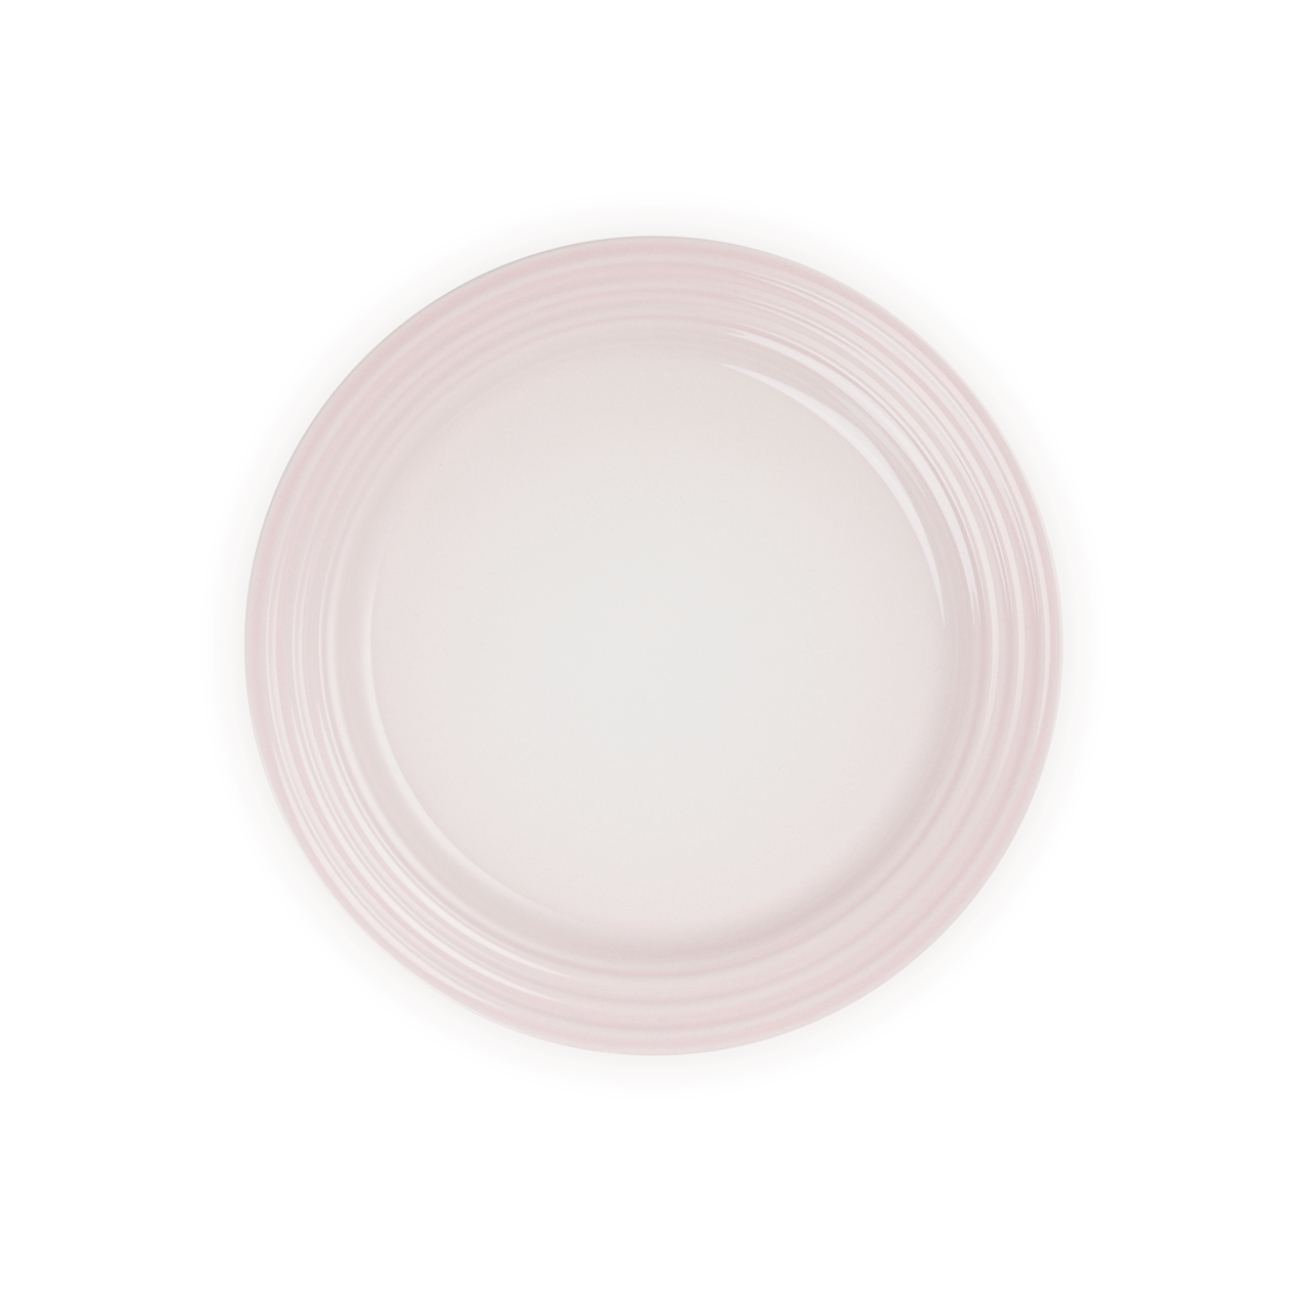 Le Creuset Dinner Plate Vancouver